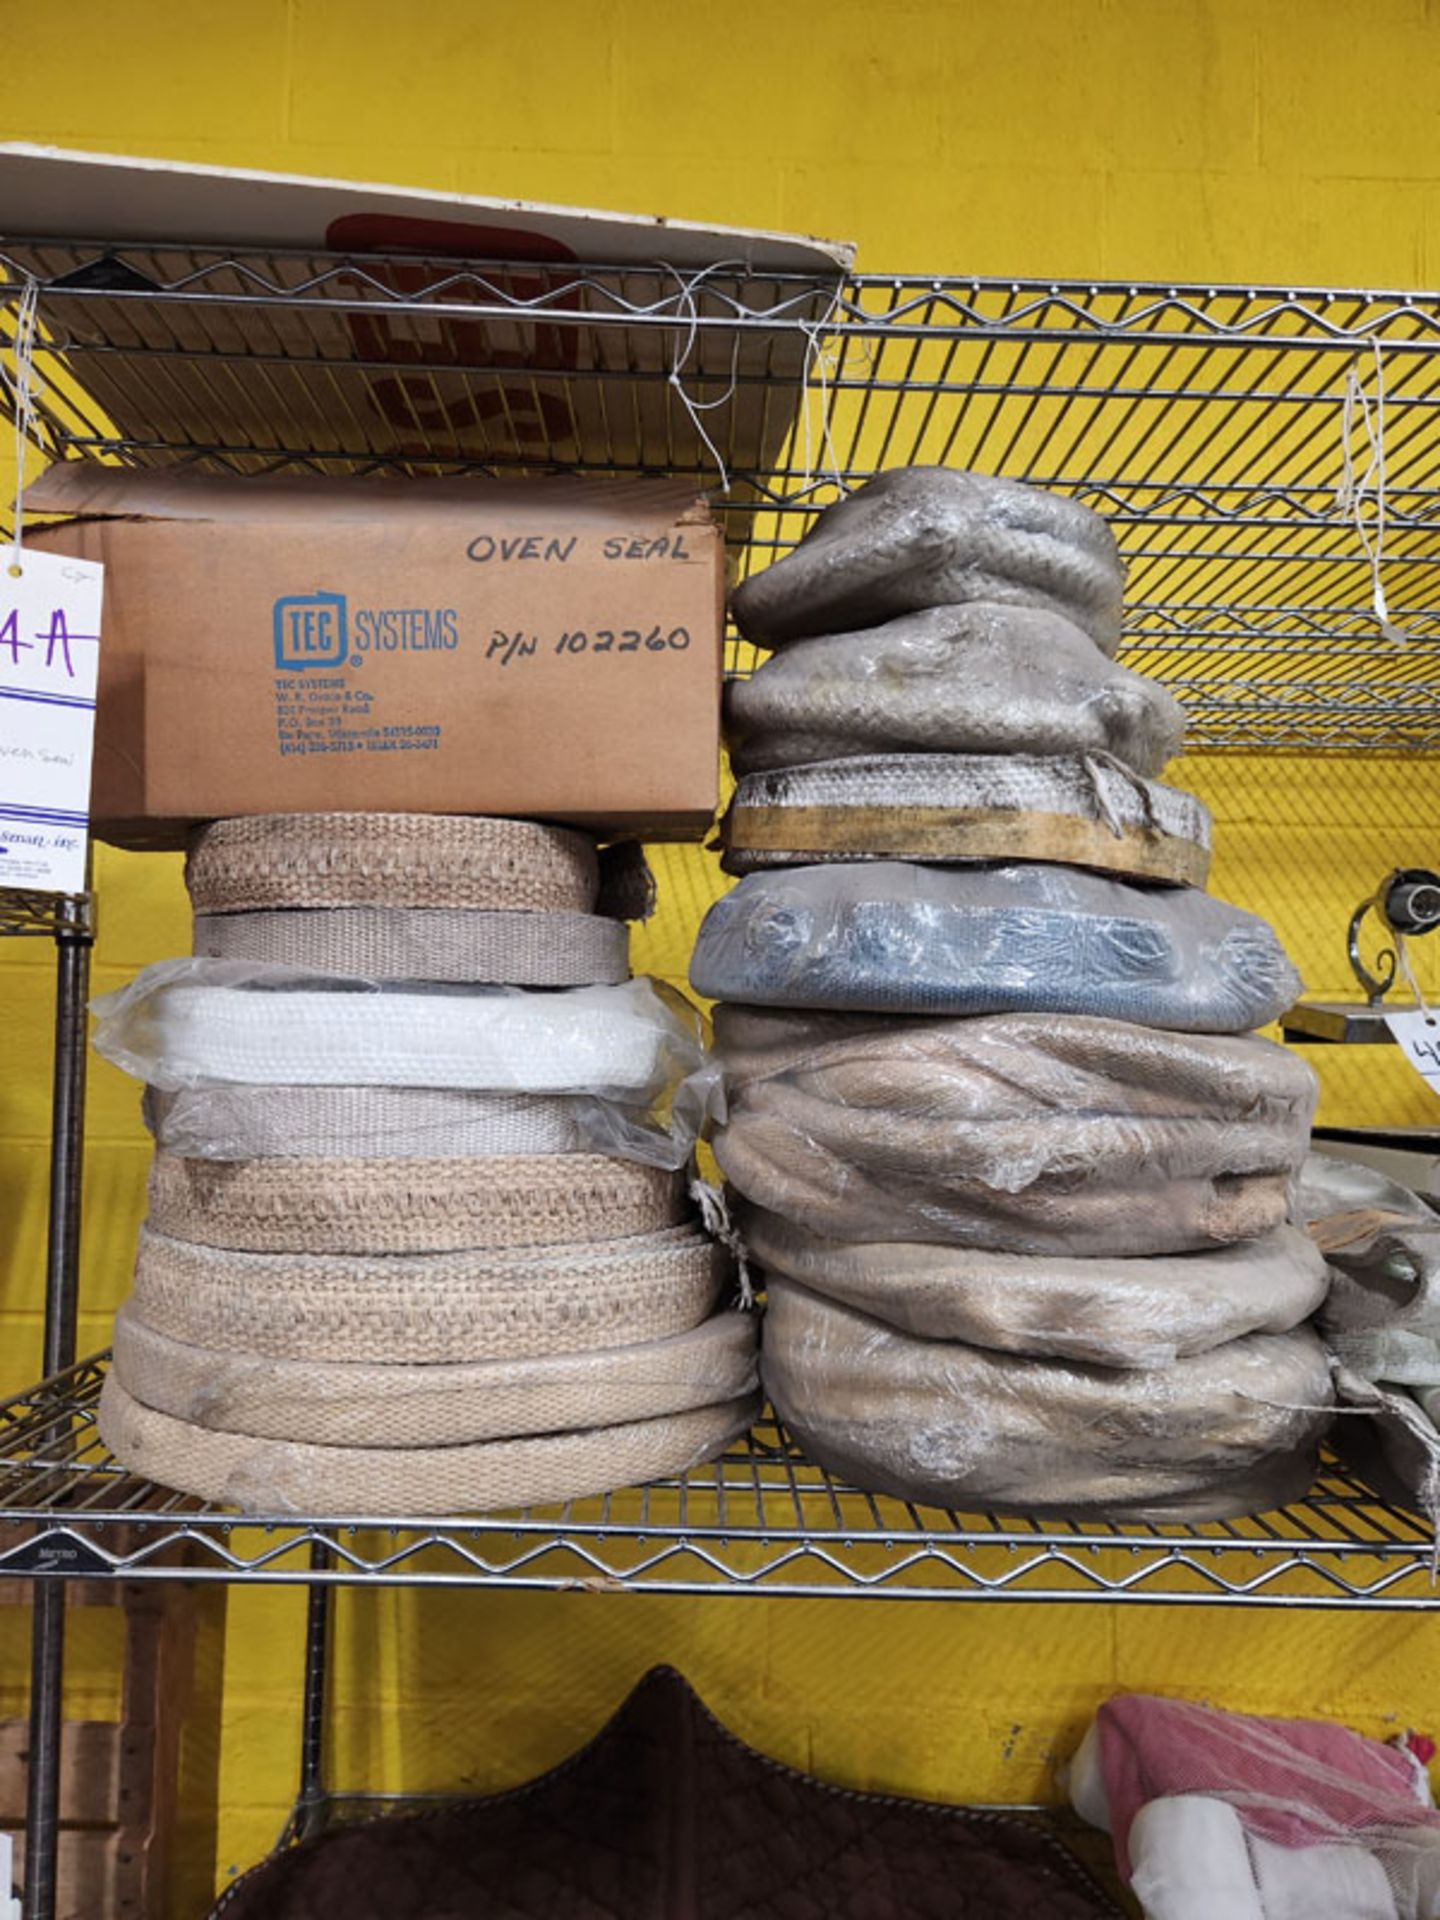 LOT OF OVEN SEAL